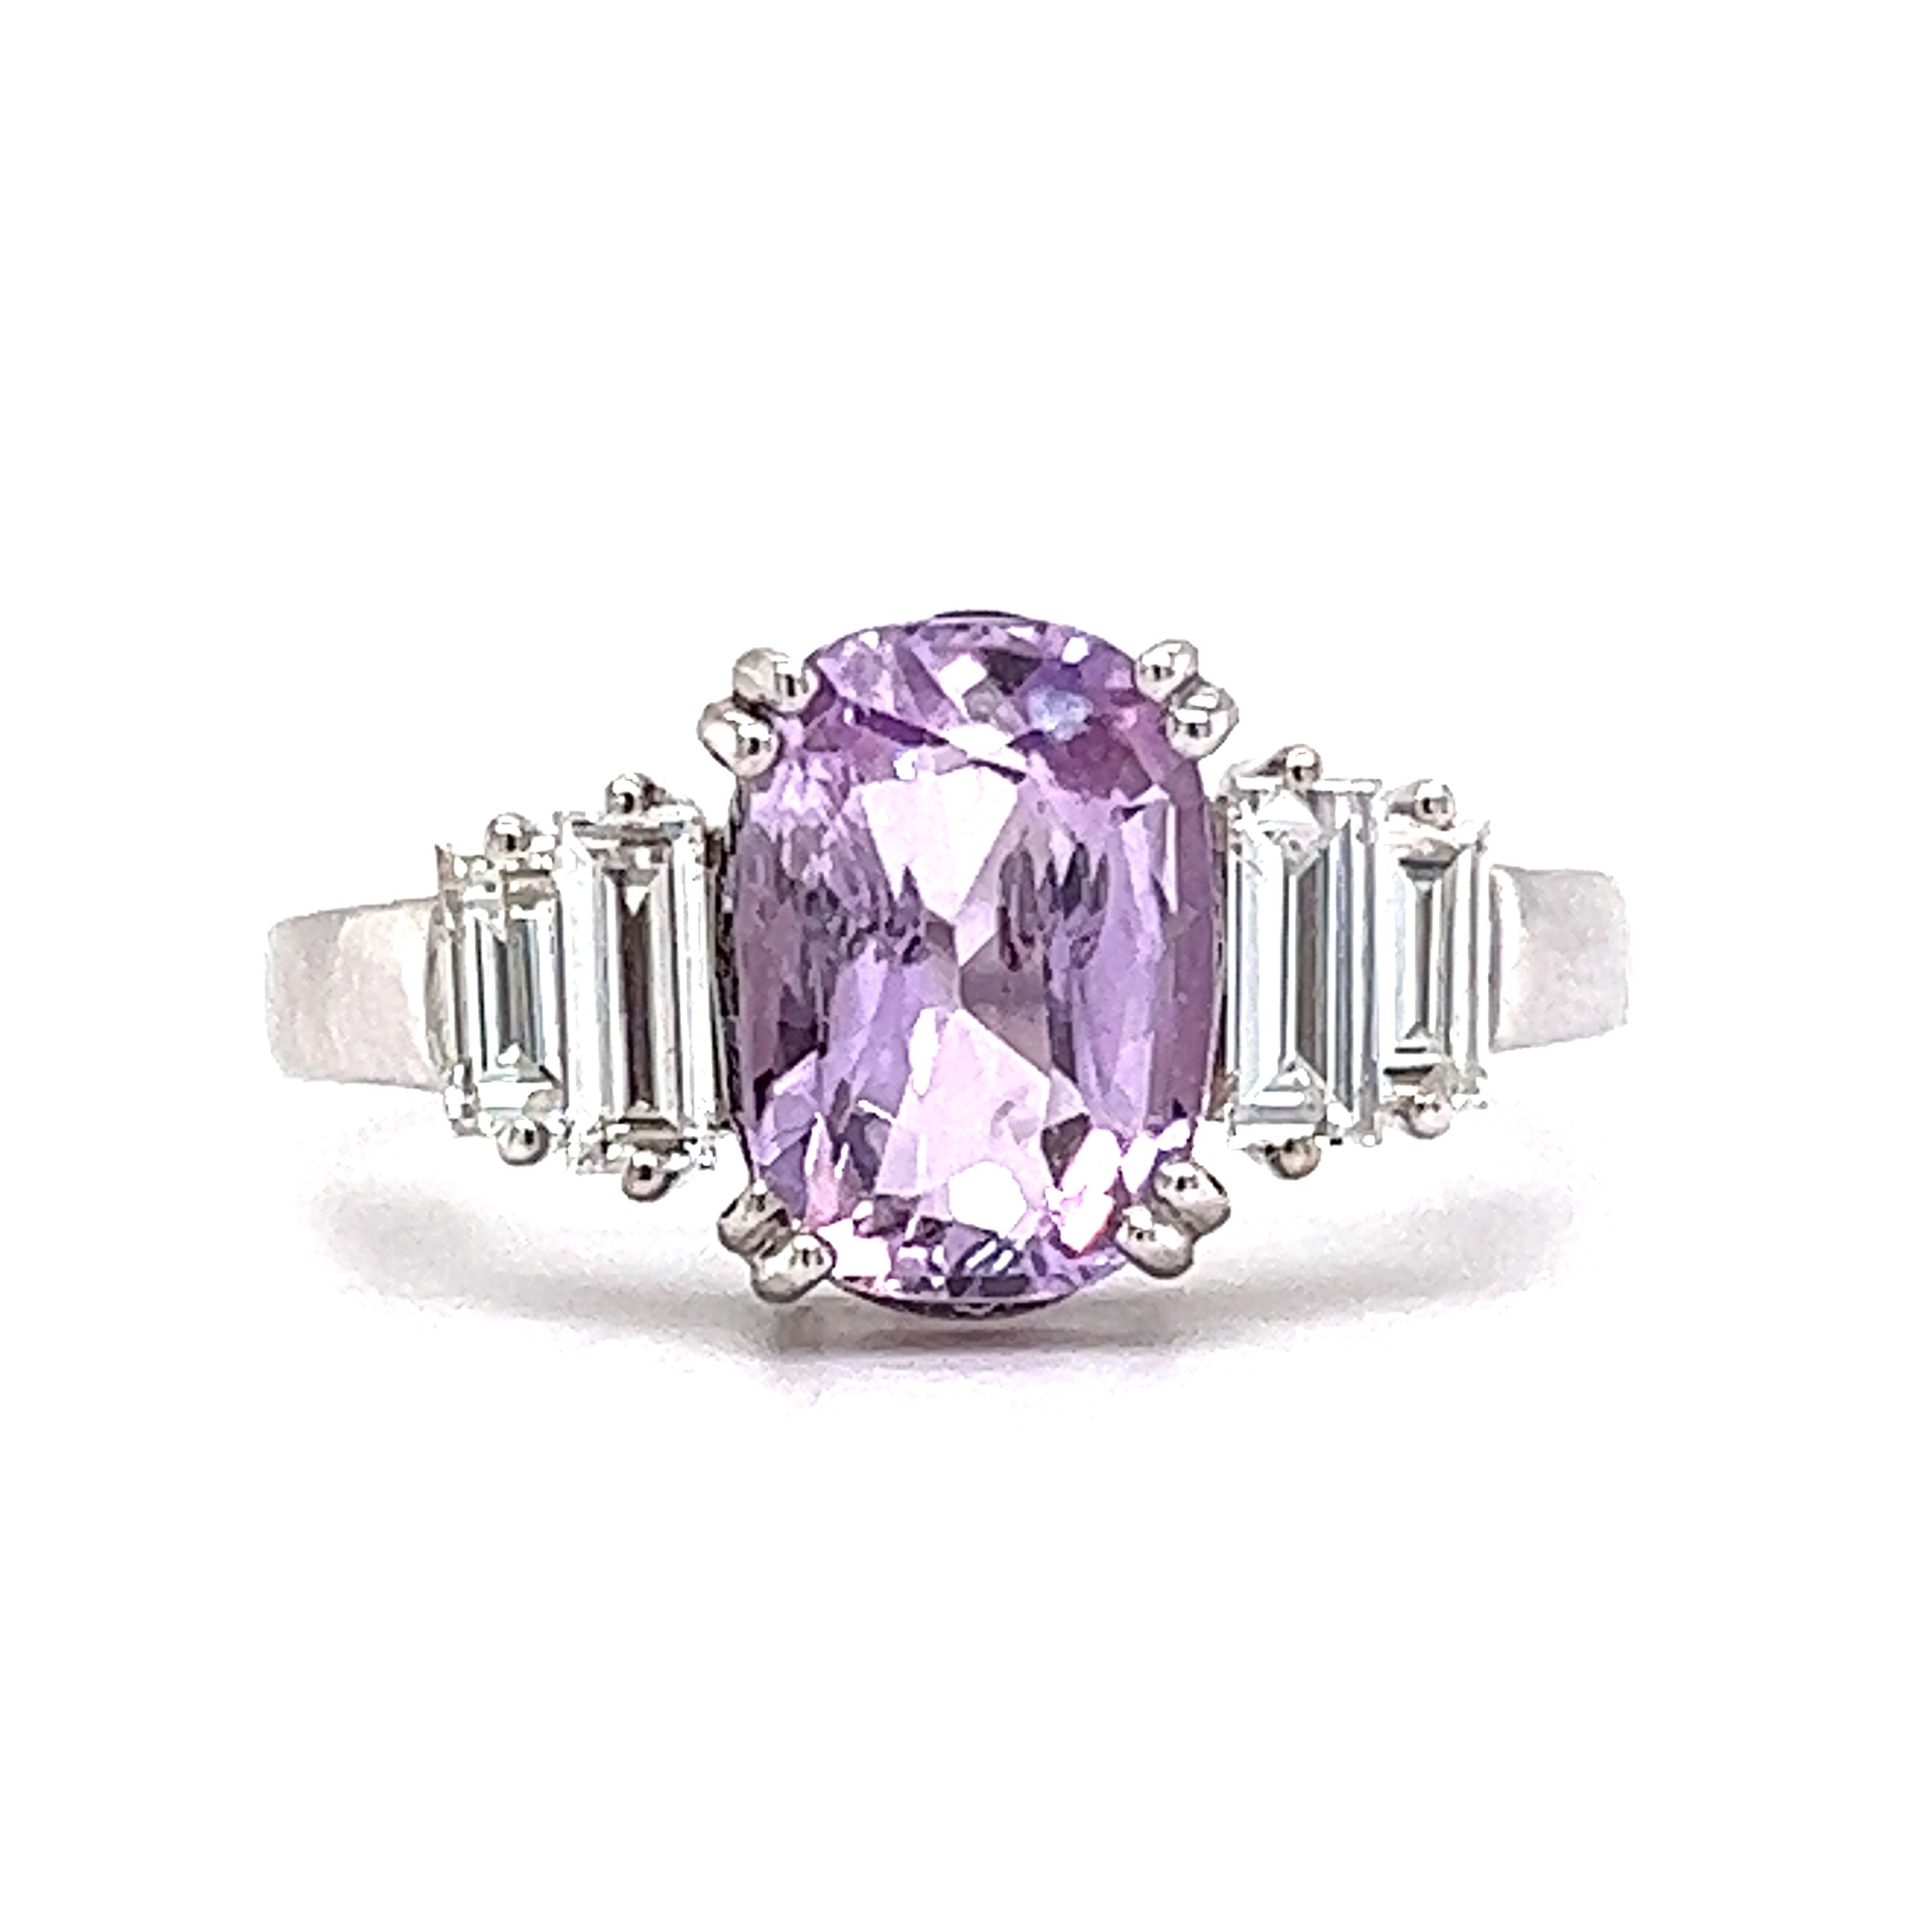 Buy RUVEE Platinum Plated Alloy Purple Crystal American Diamond Ring for  Women & Girls (Purple) at Amazon.in